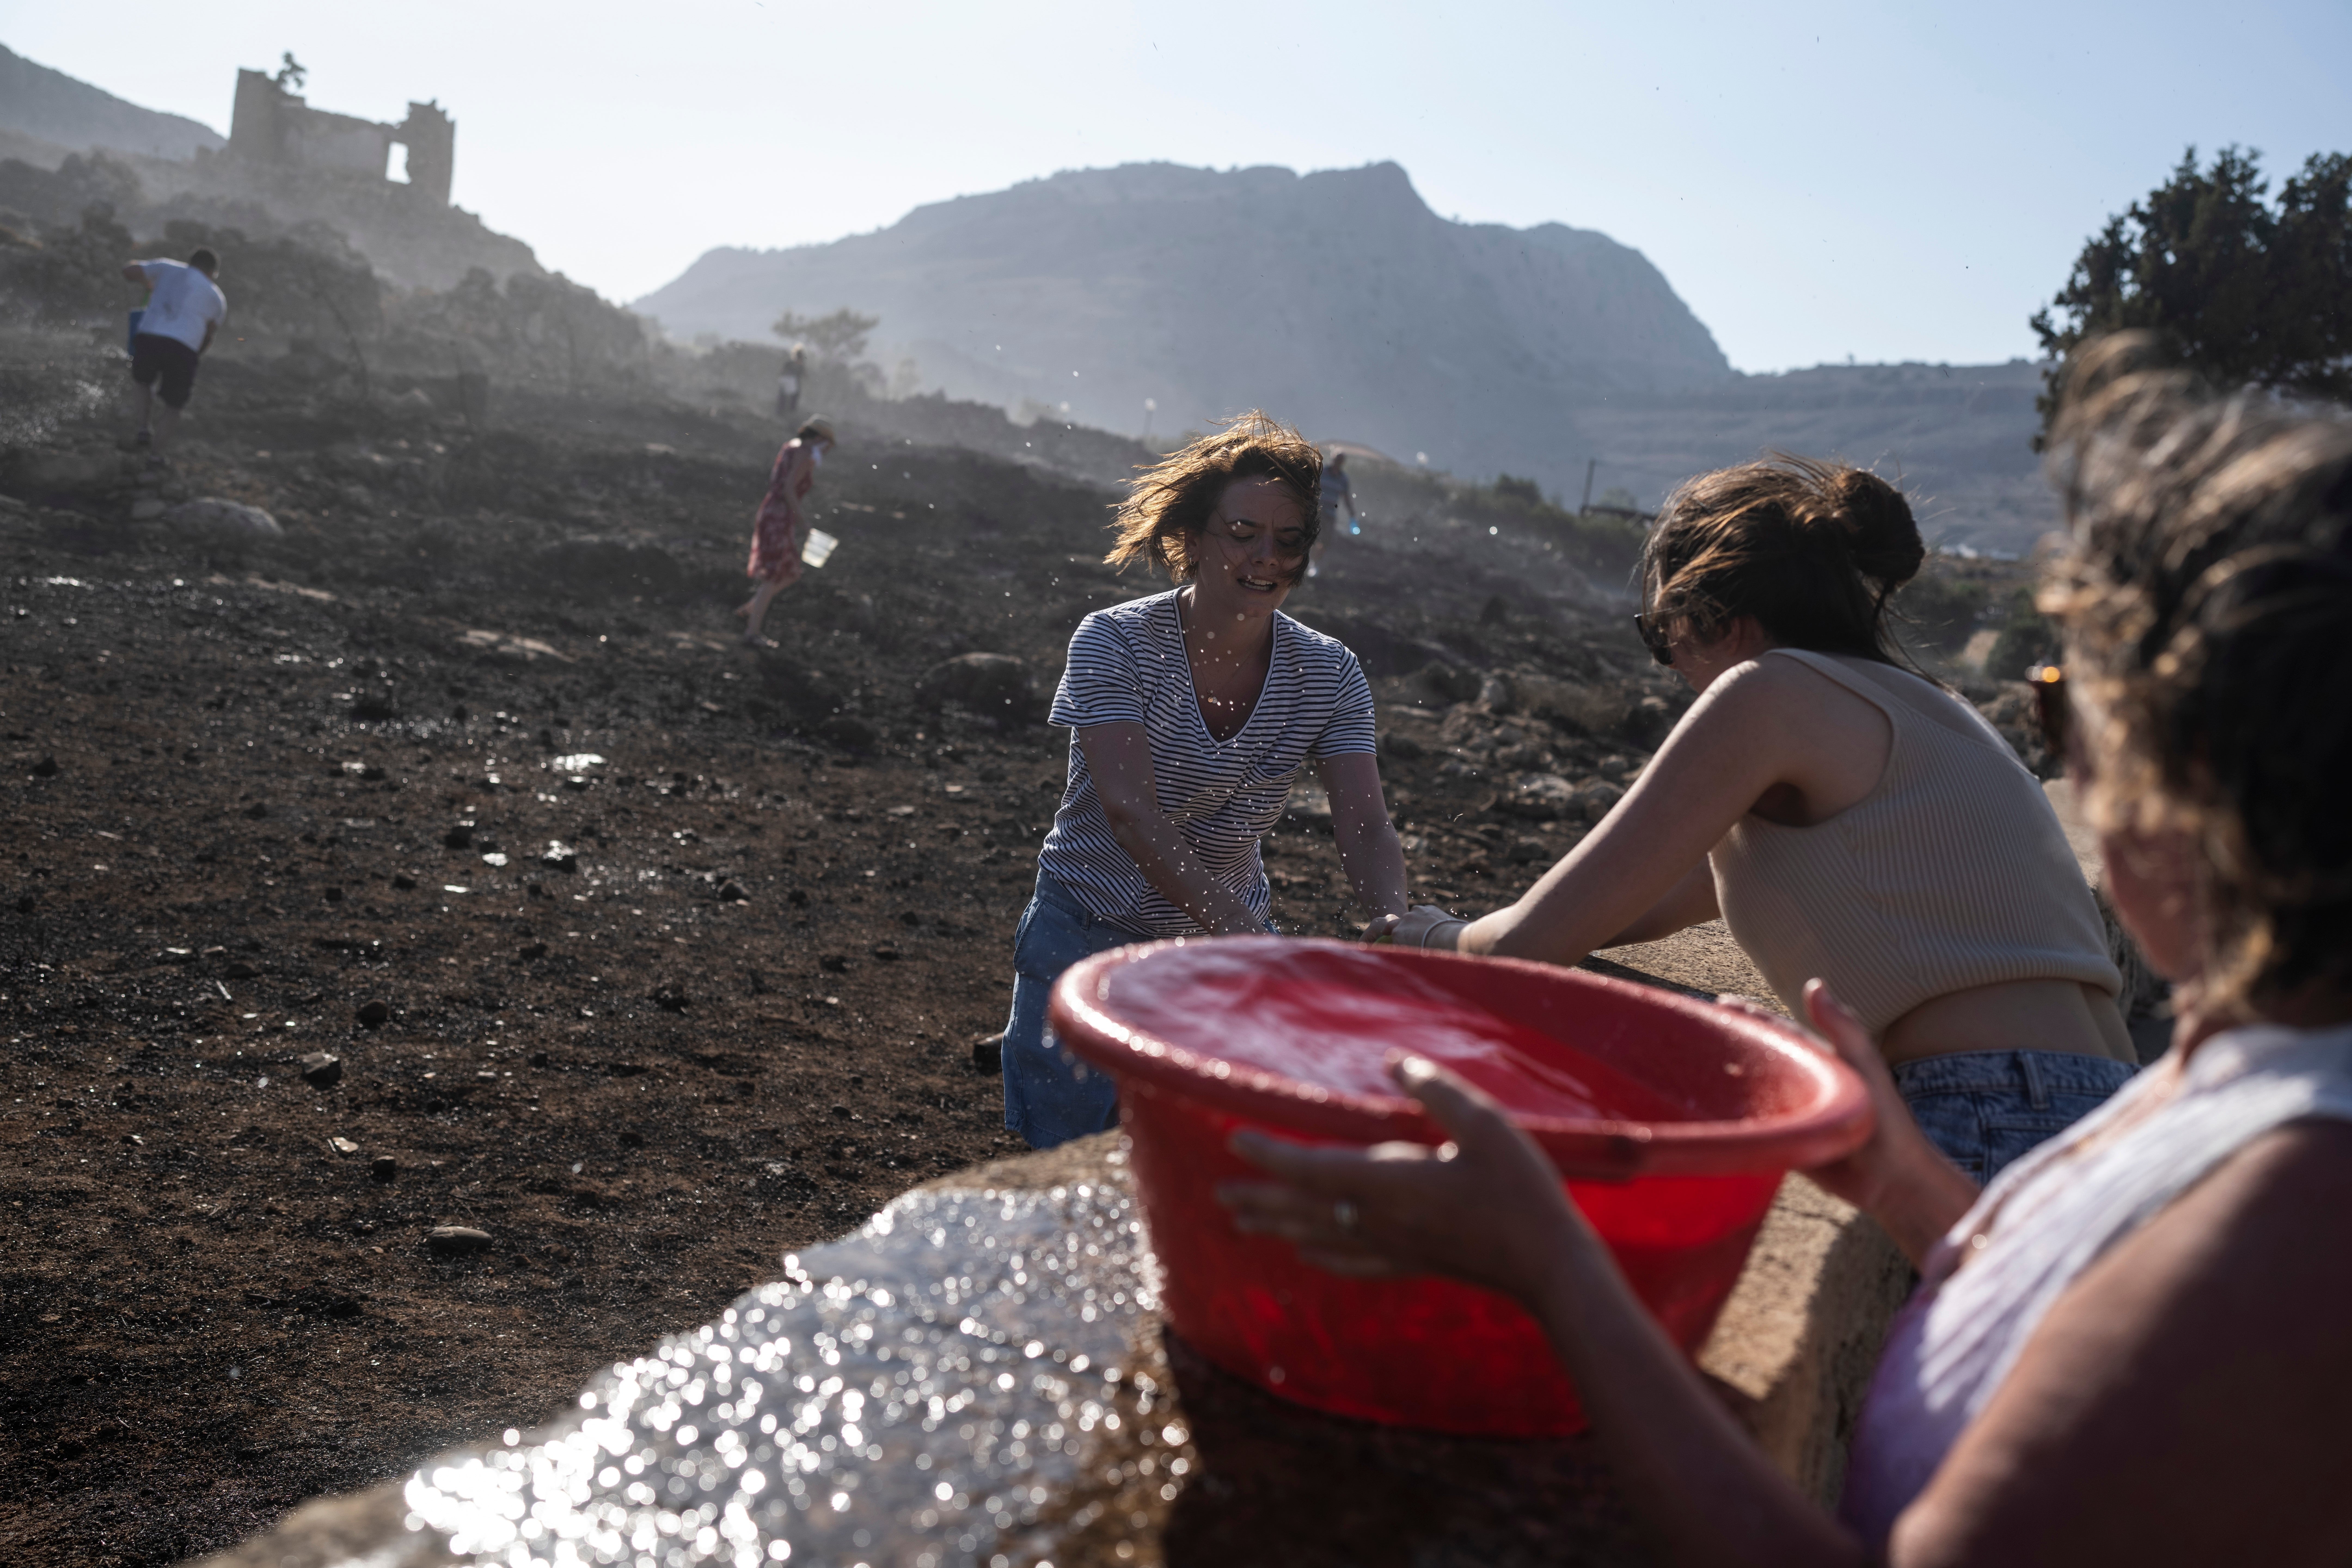 German tourists together with local residents try to extinguish a fire near the seaside resort of Lindos